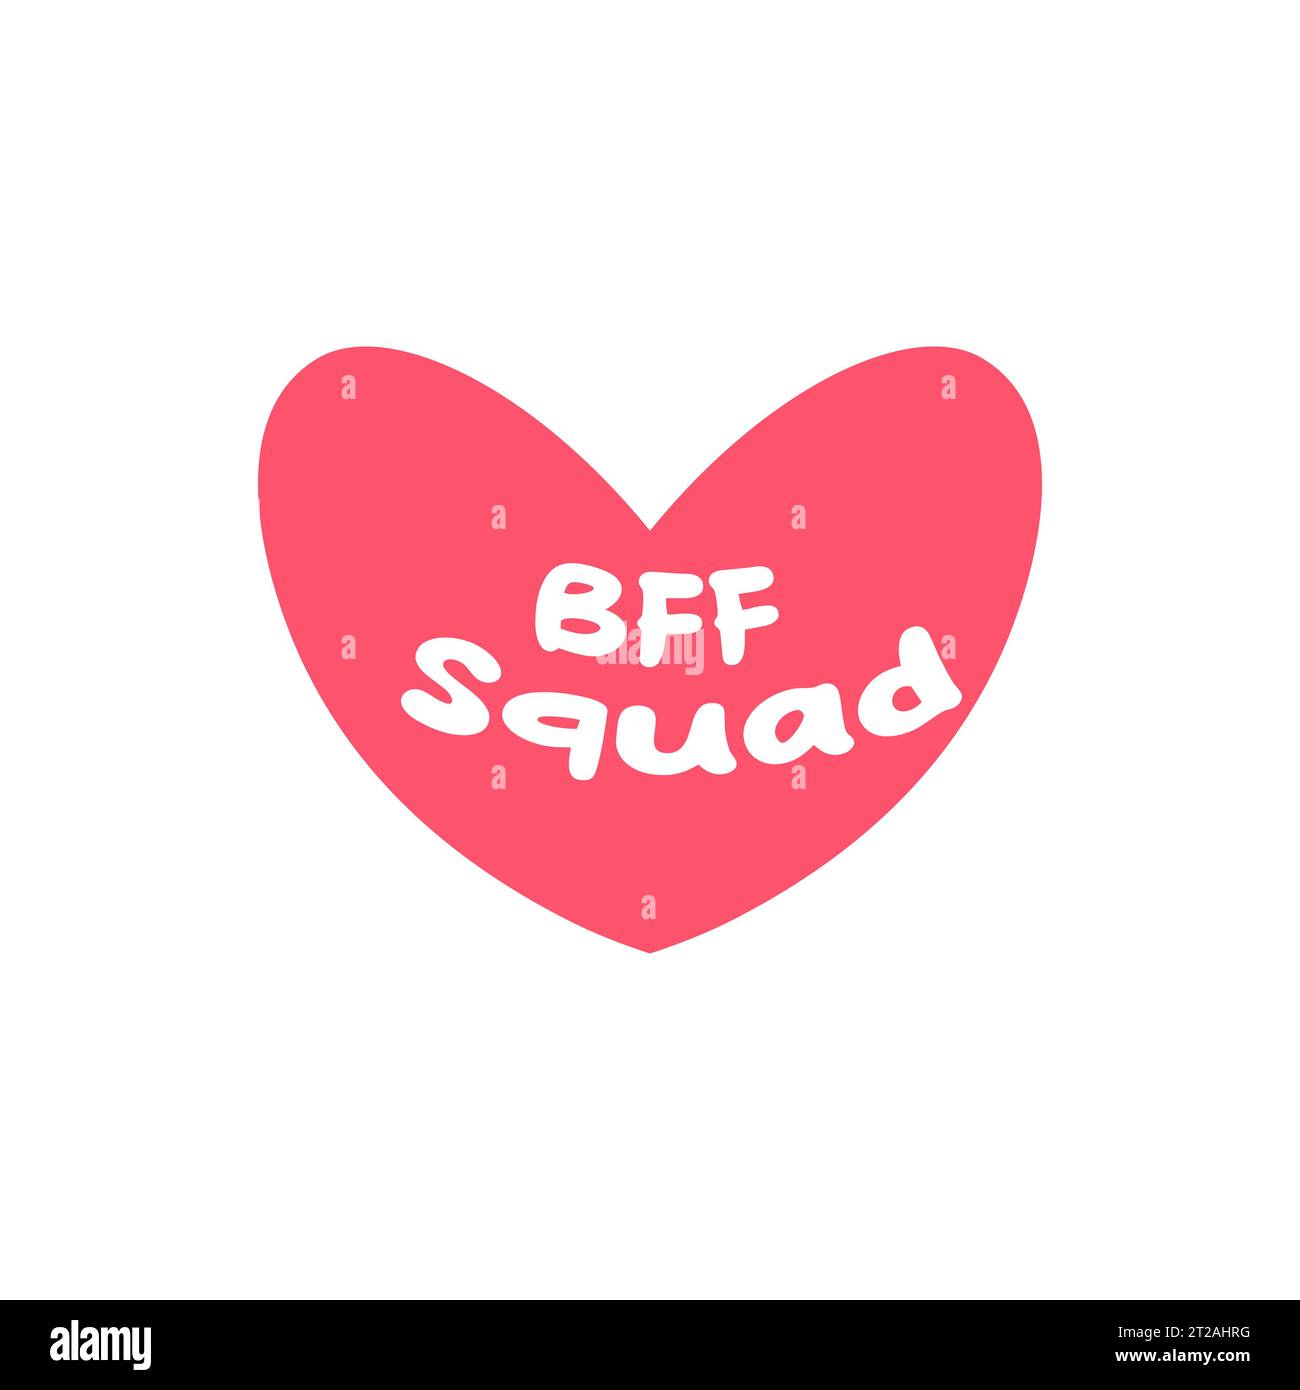 heart, best friends, love, bff squad. Vector illustration Stock Vector